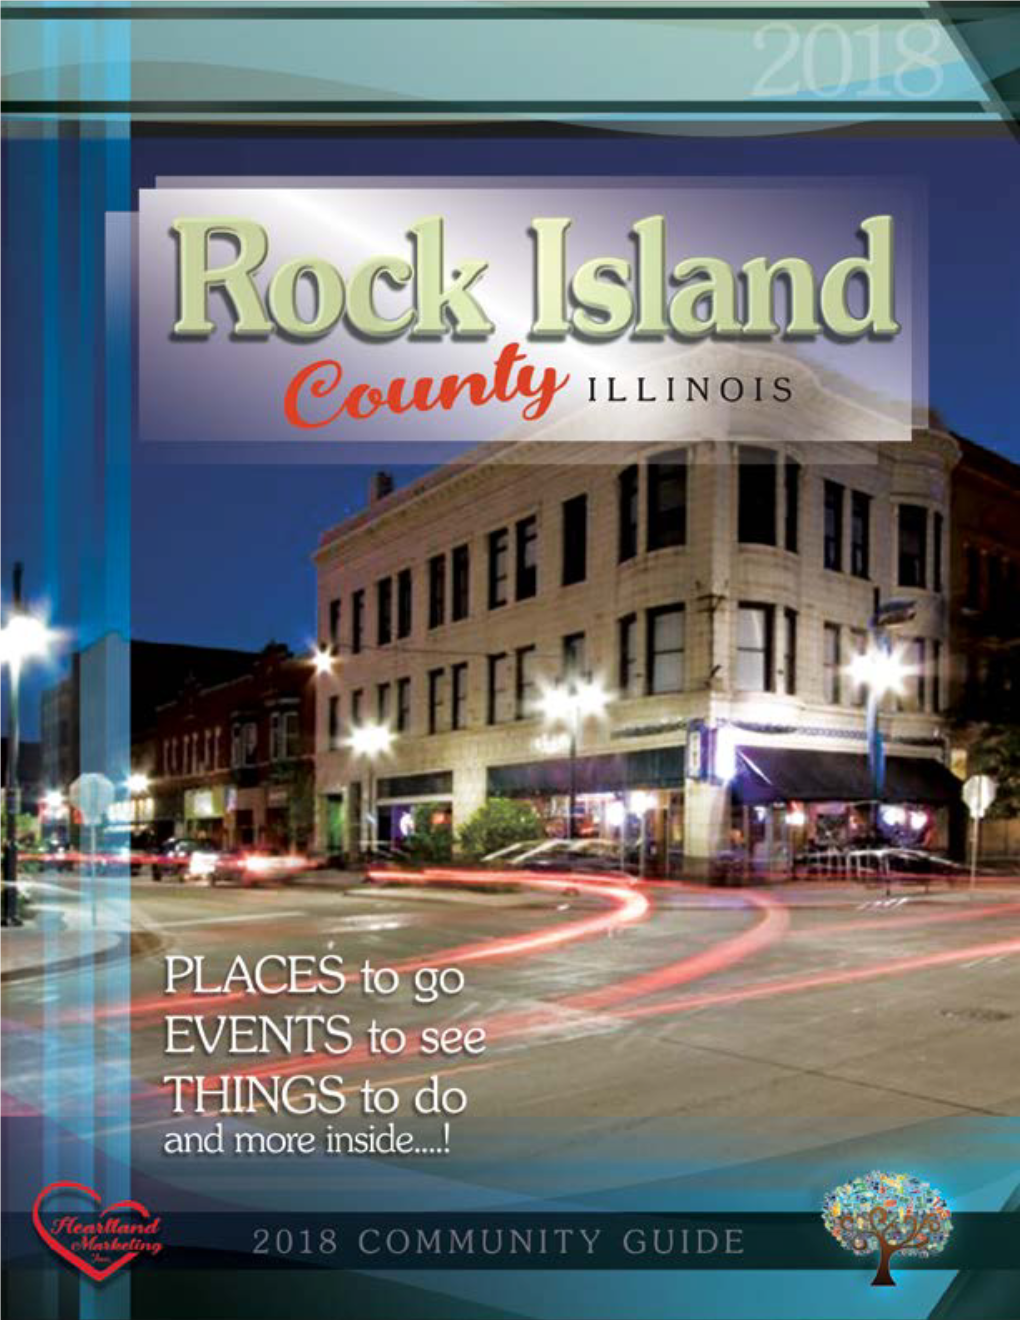 About Rock Island County